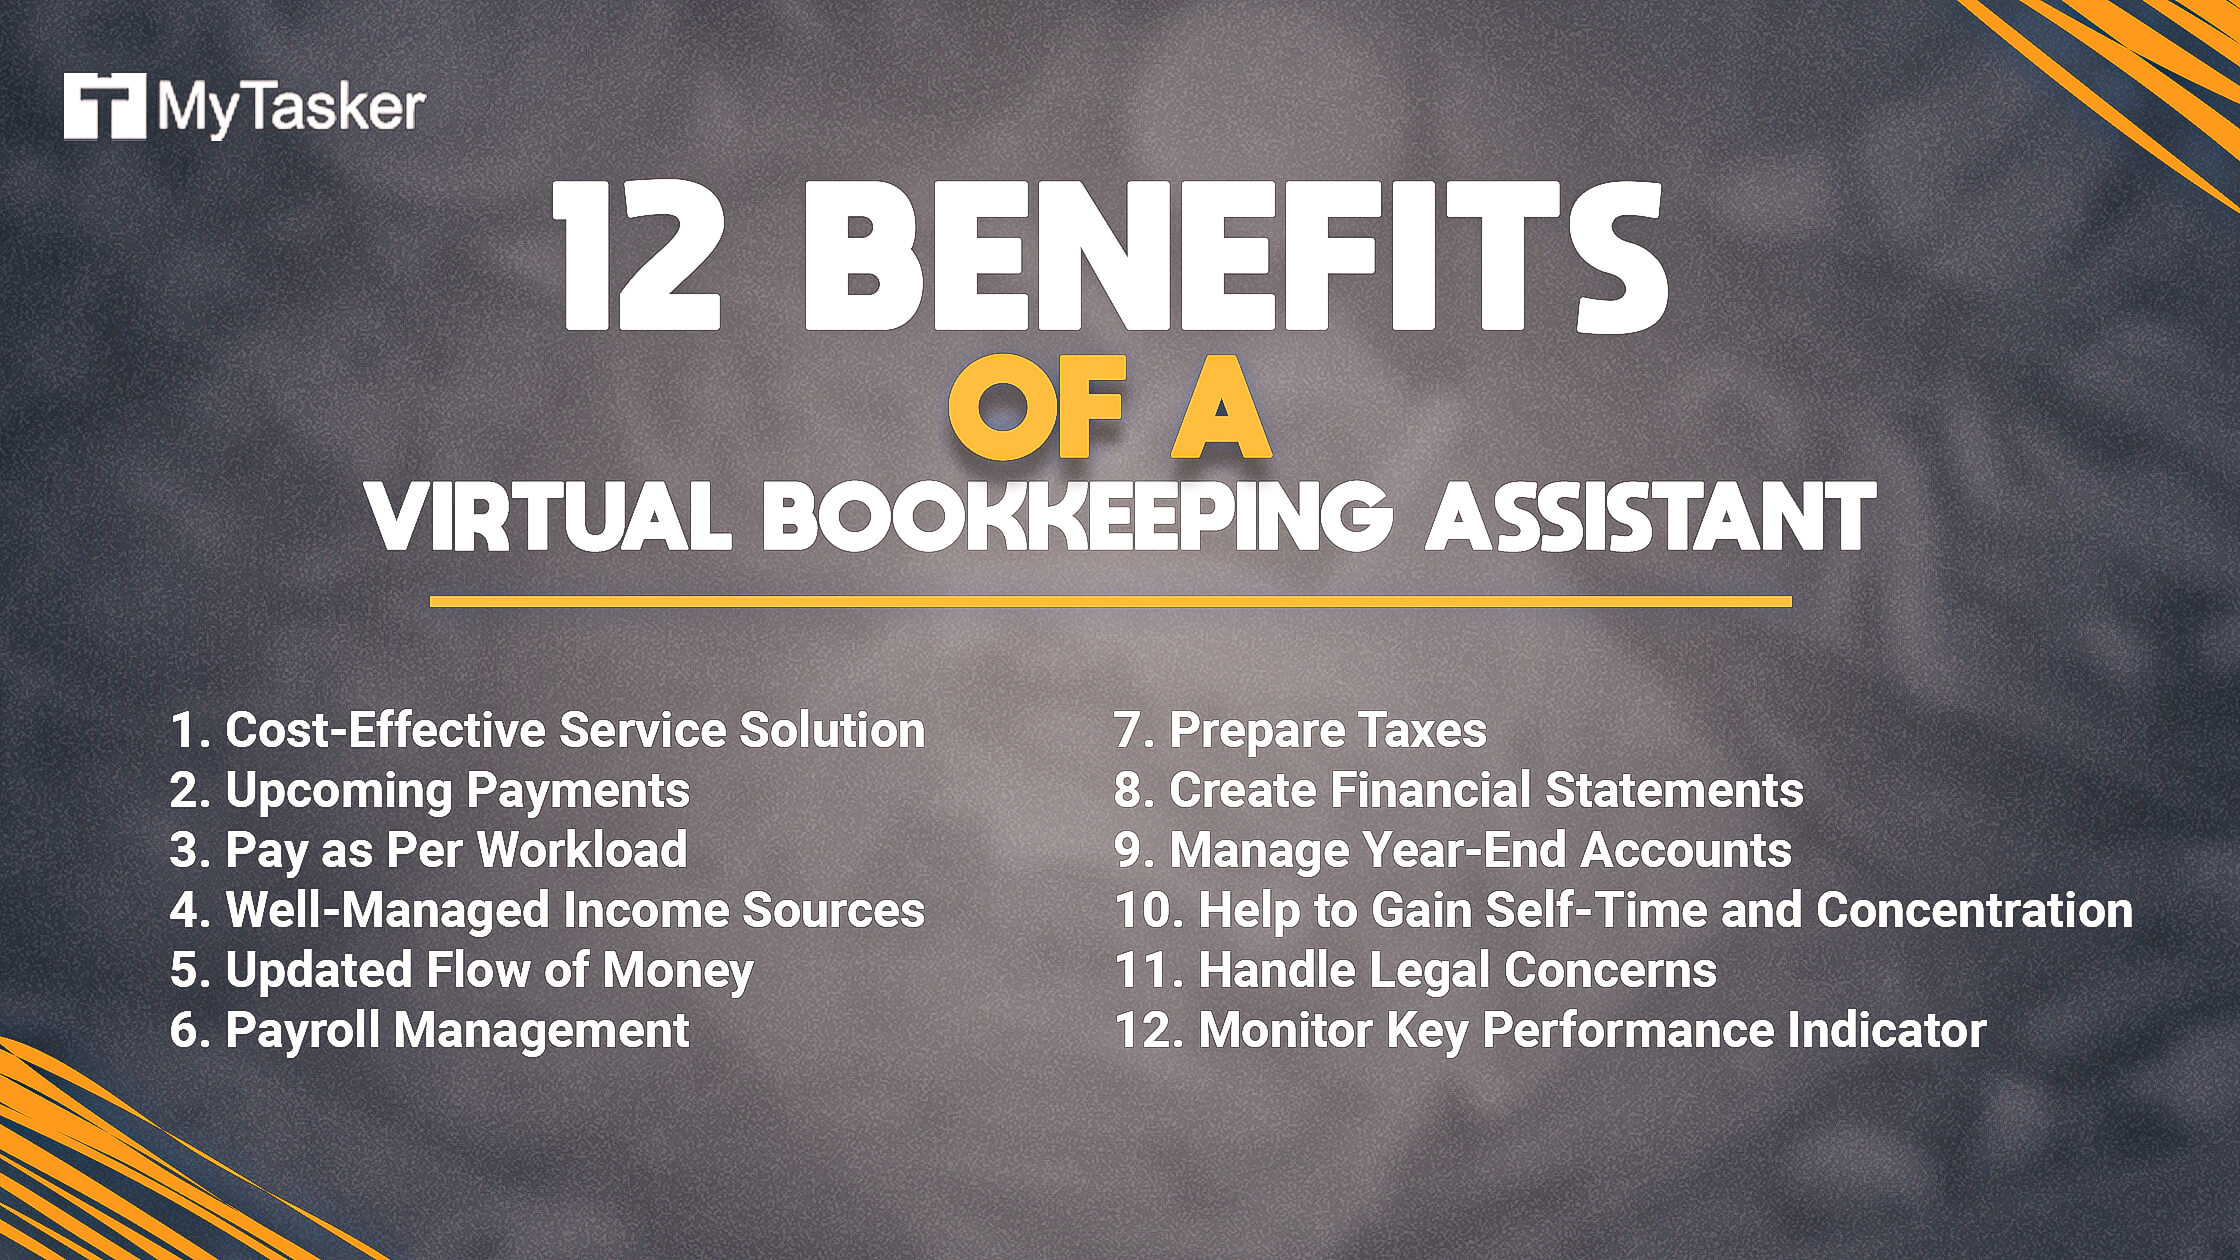 12 Benefits of A Virtual Bookkeeping Assistant